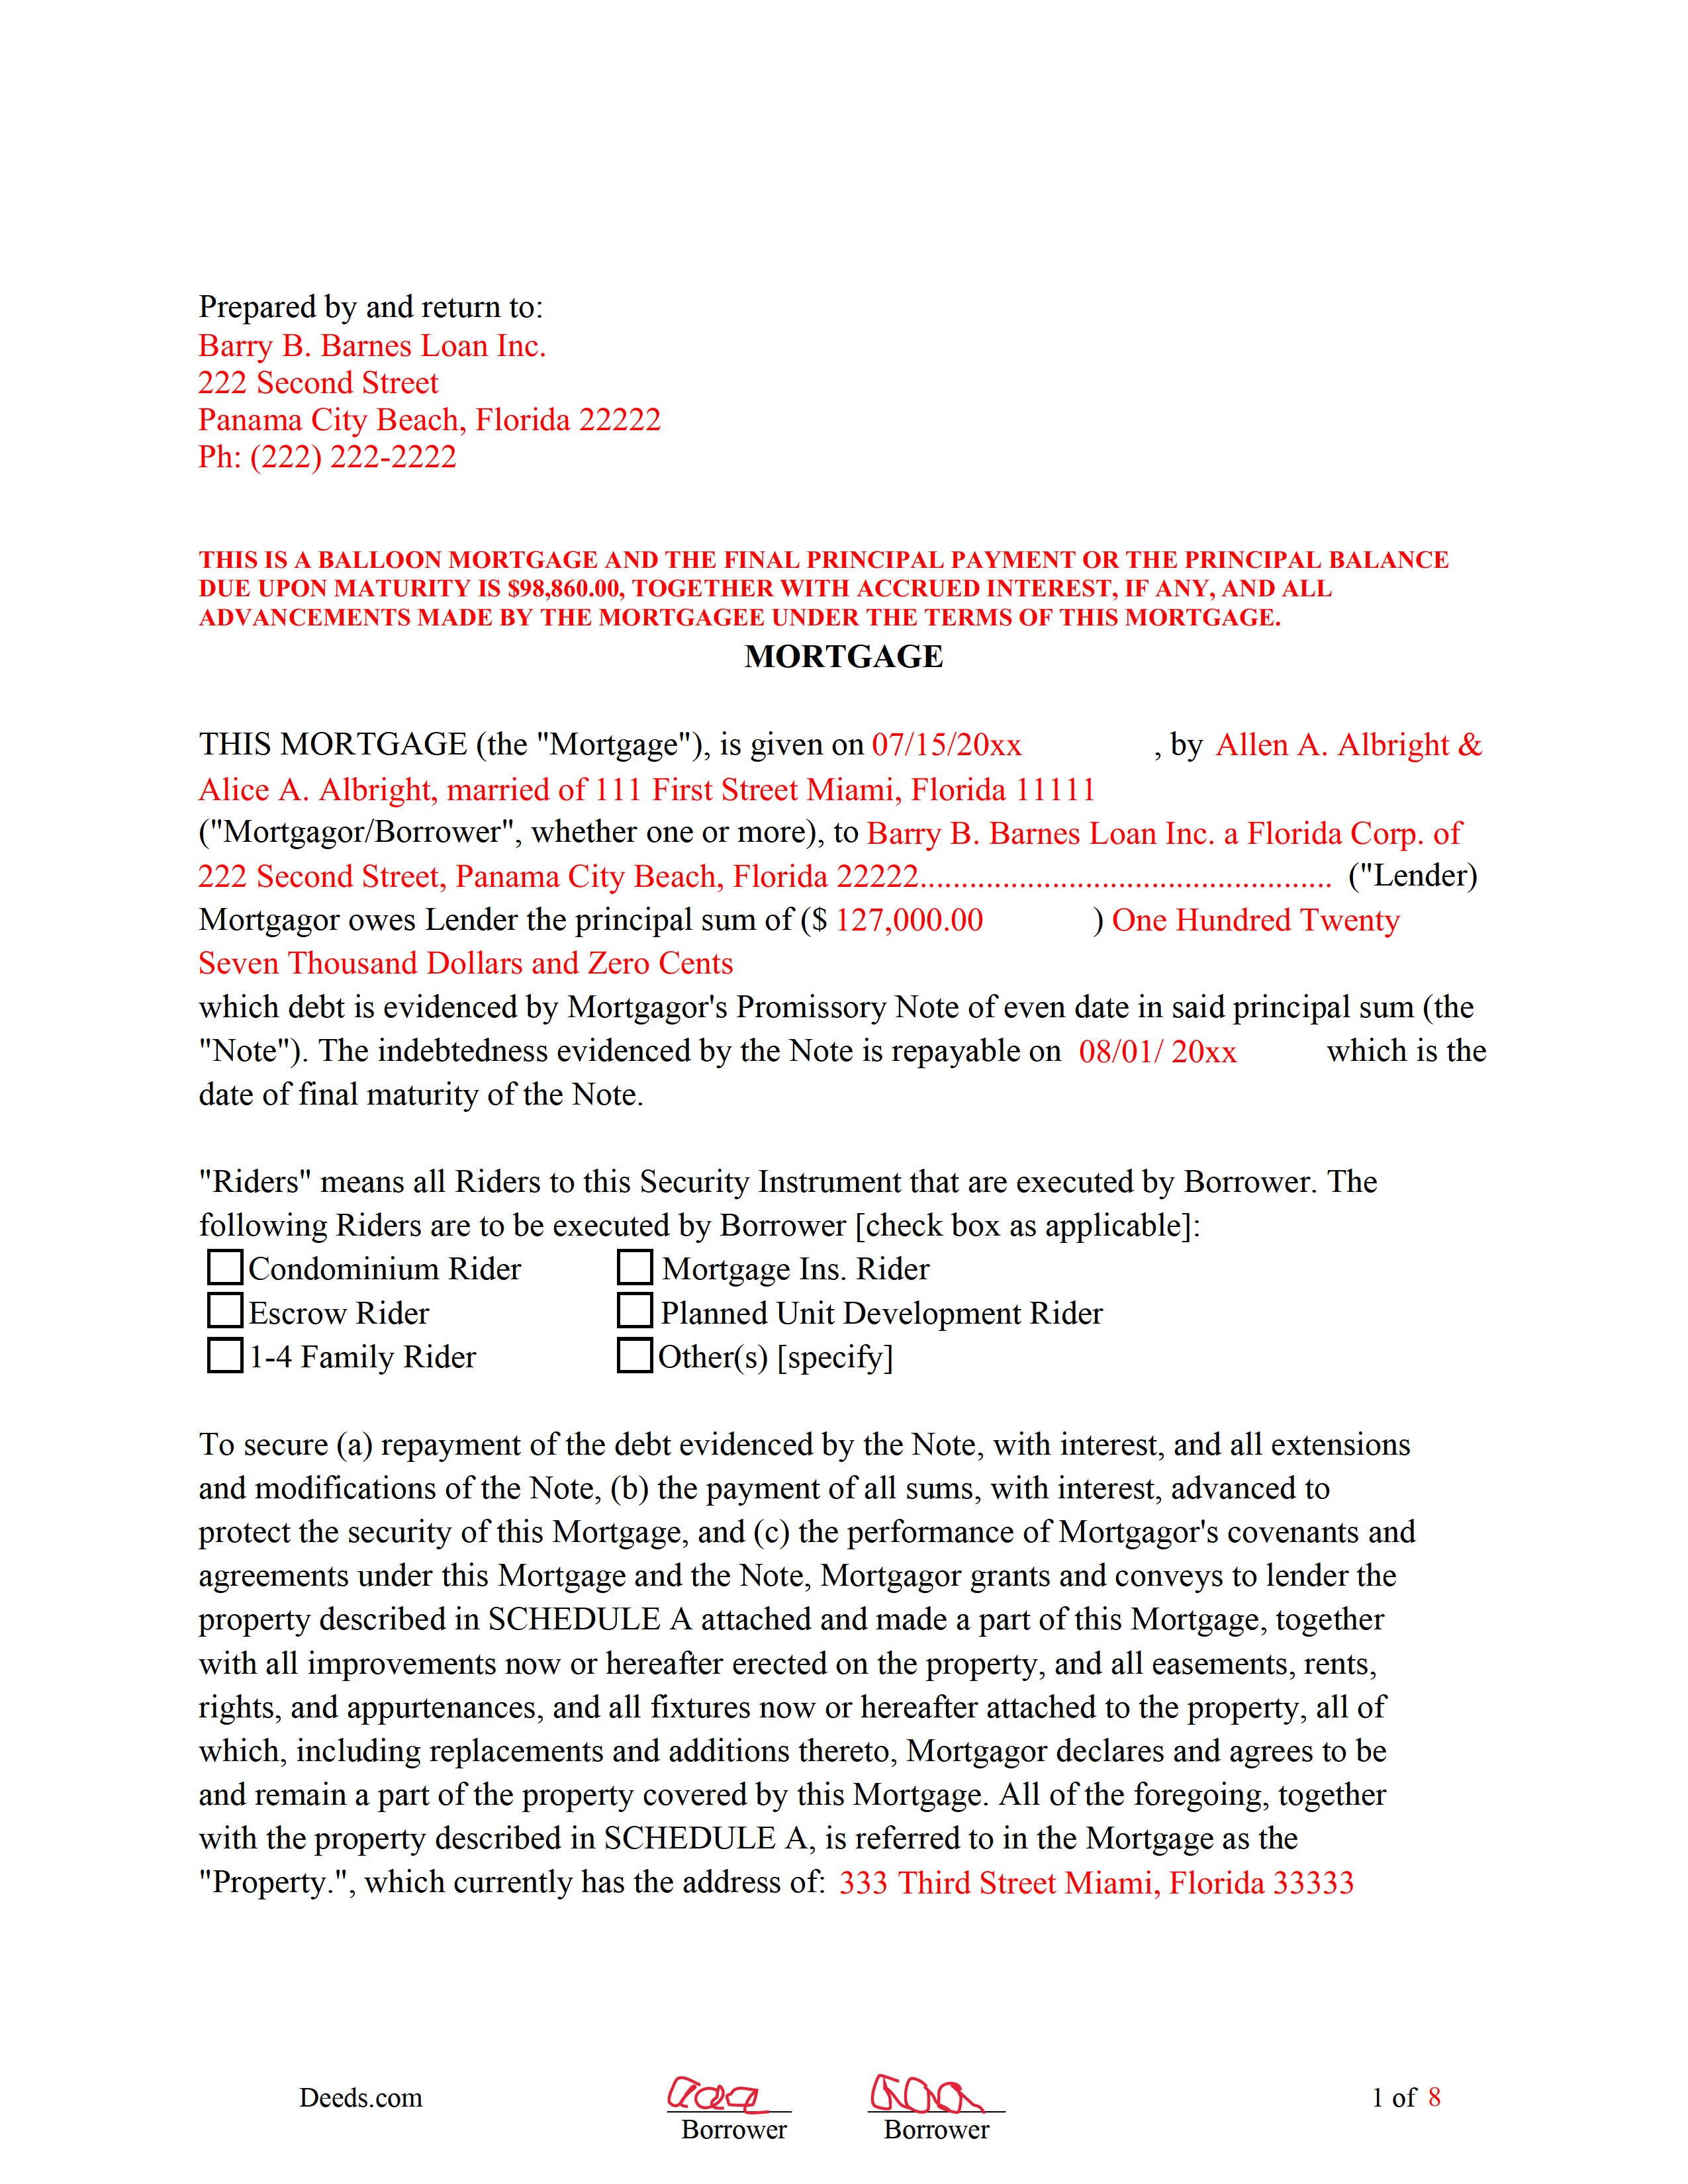 Completed Example of the Mortgage with Assignment of Rents and Promissory Note Document